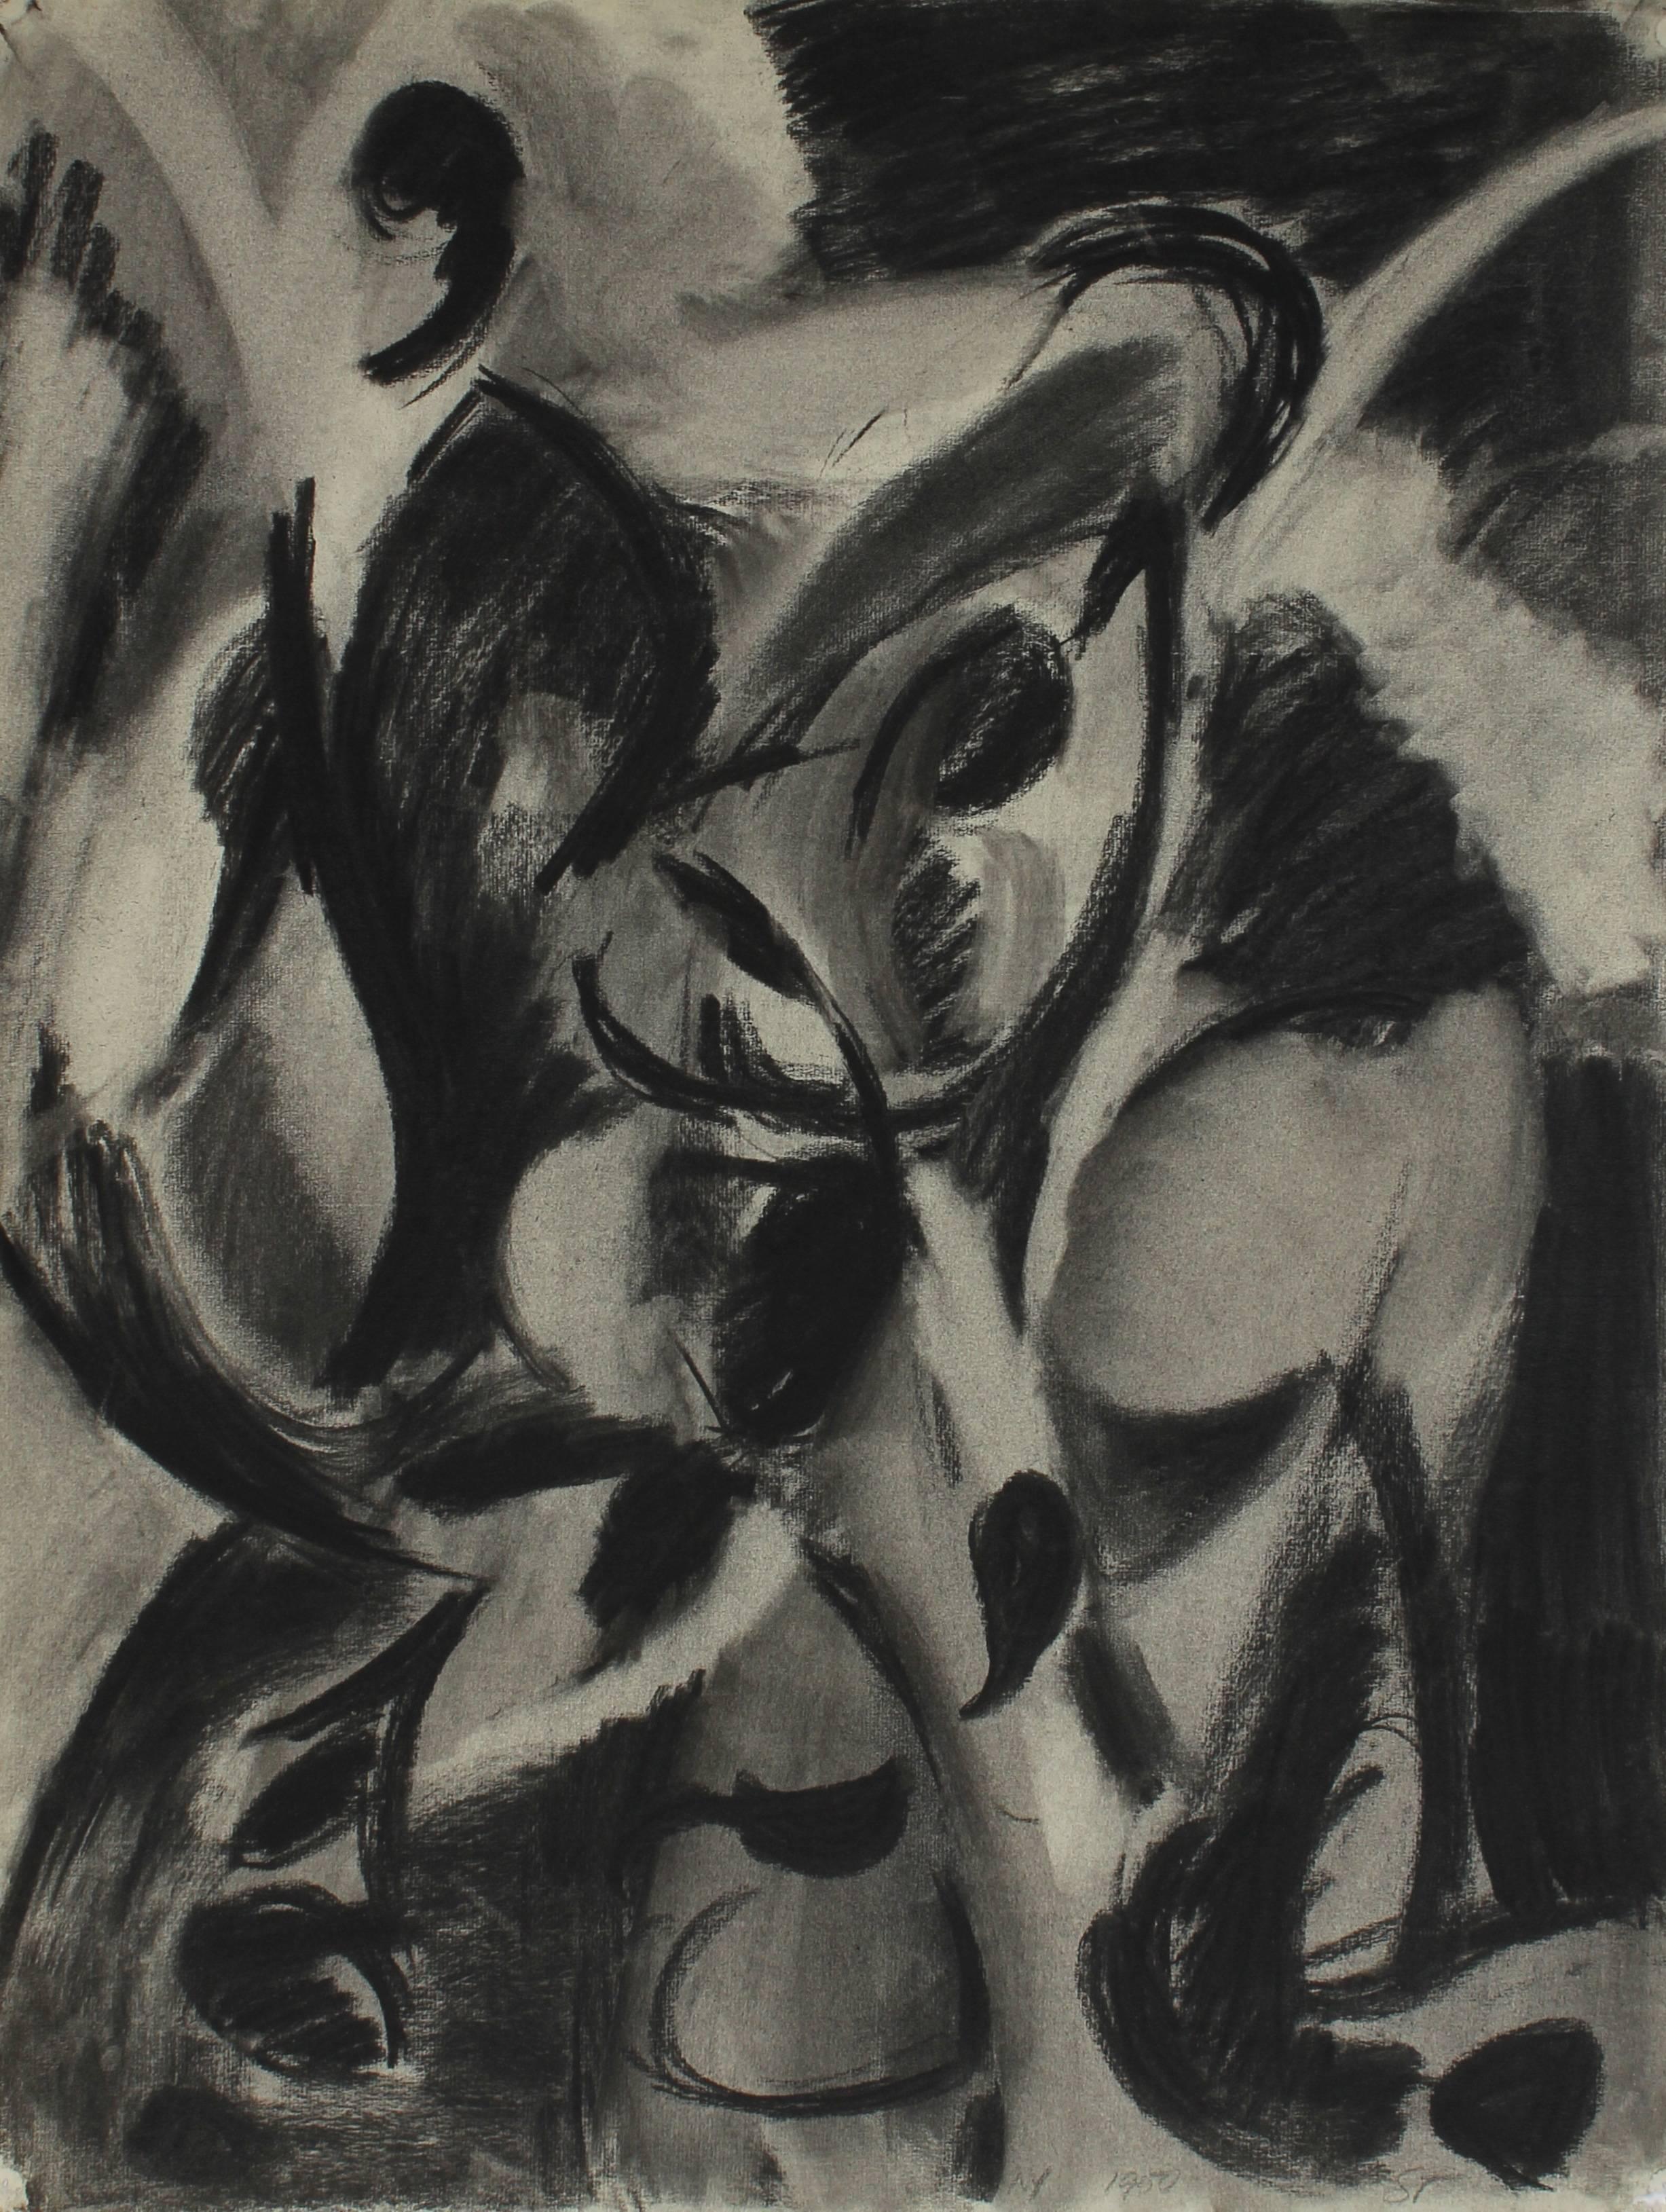 Seymour Tubis Abstract Drawing - Monochromatic Abstract Figures in Charcoal, 1950